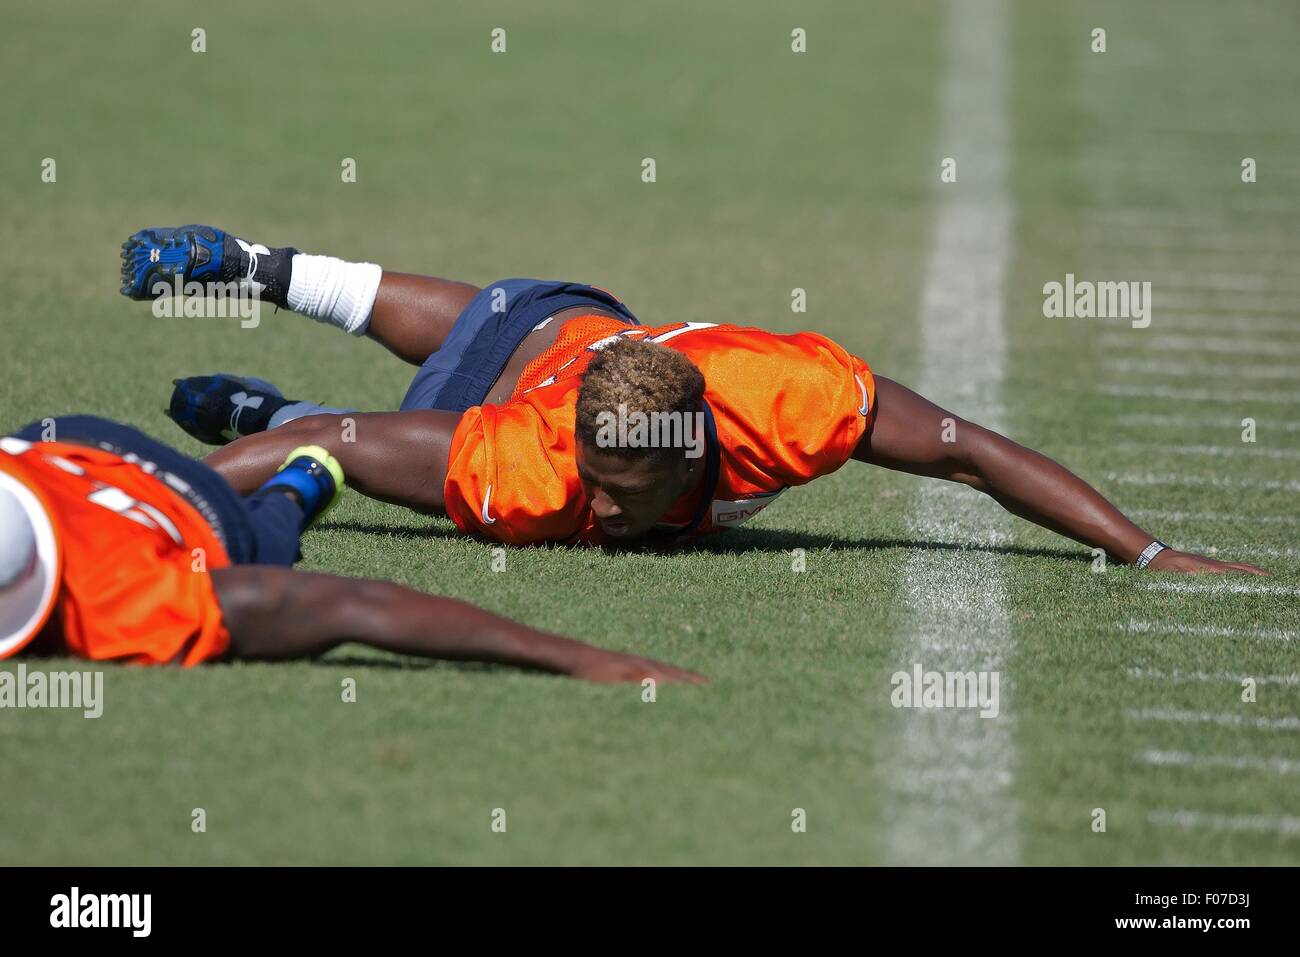 Englewood, Colorado, USA. 9th Aug, 2015. Broncos ILB STEVEN JOHNSON stretches on the field before the start of drills during the Broncos Training Camp at UCHealth Training Center at Dove Valley Sat. Morning. © Hector Acevedo/ZUMA Wire/Alamy Live News Stock Photo